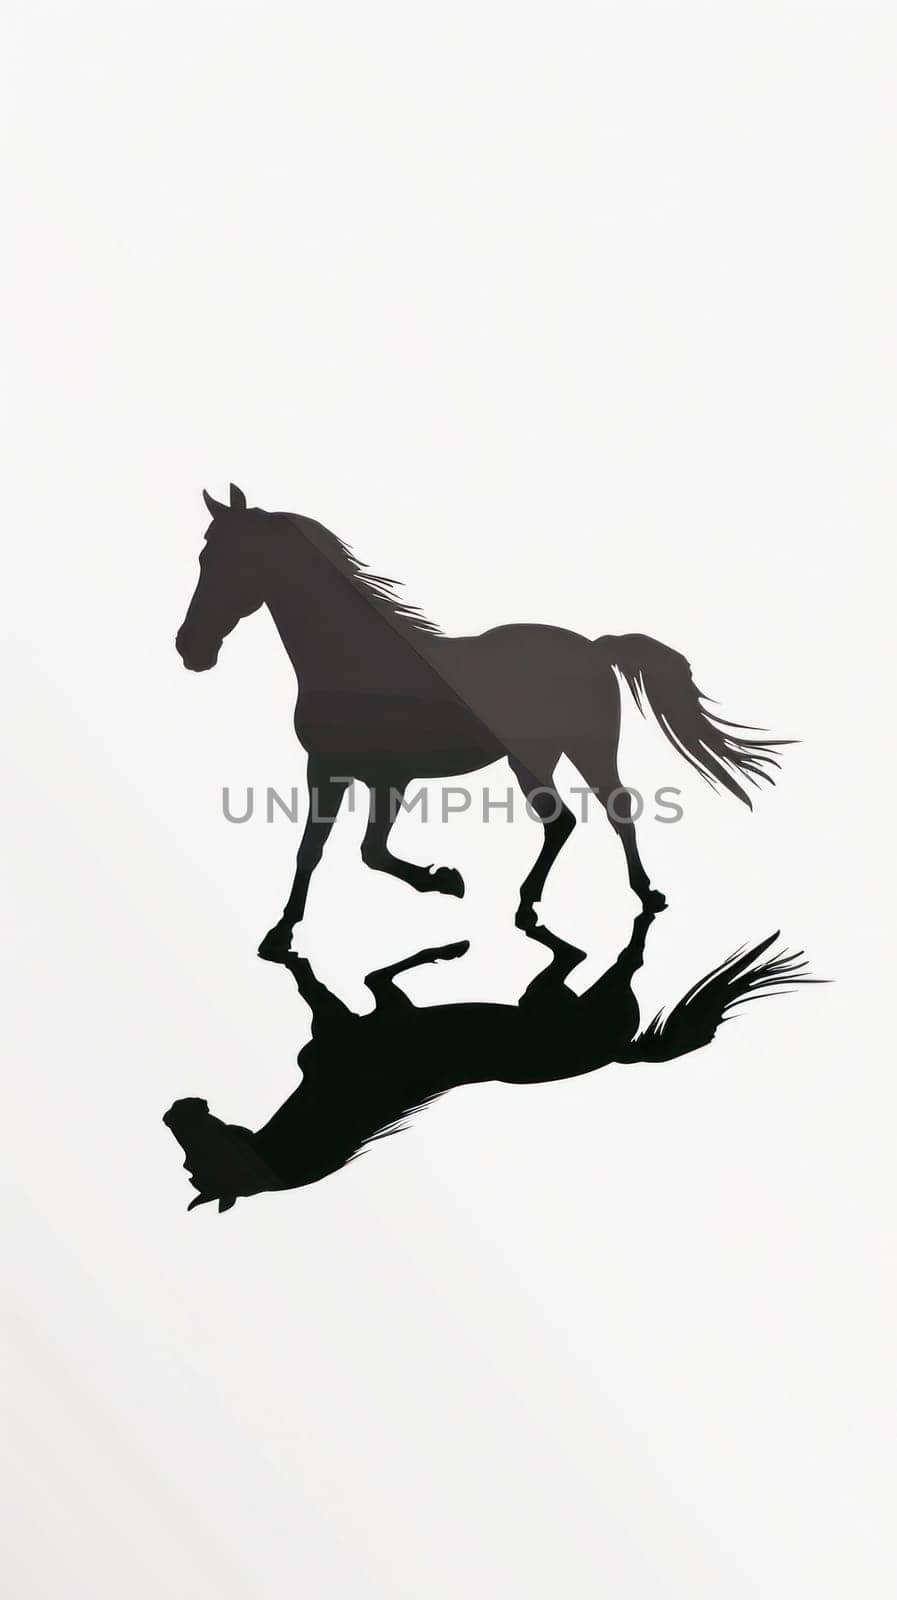 A stunning image captures the elegance of a horse as it moves gracefully against a clean, white backdrop